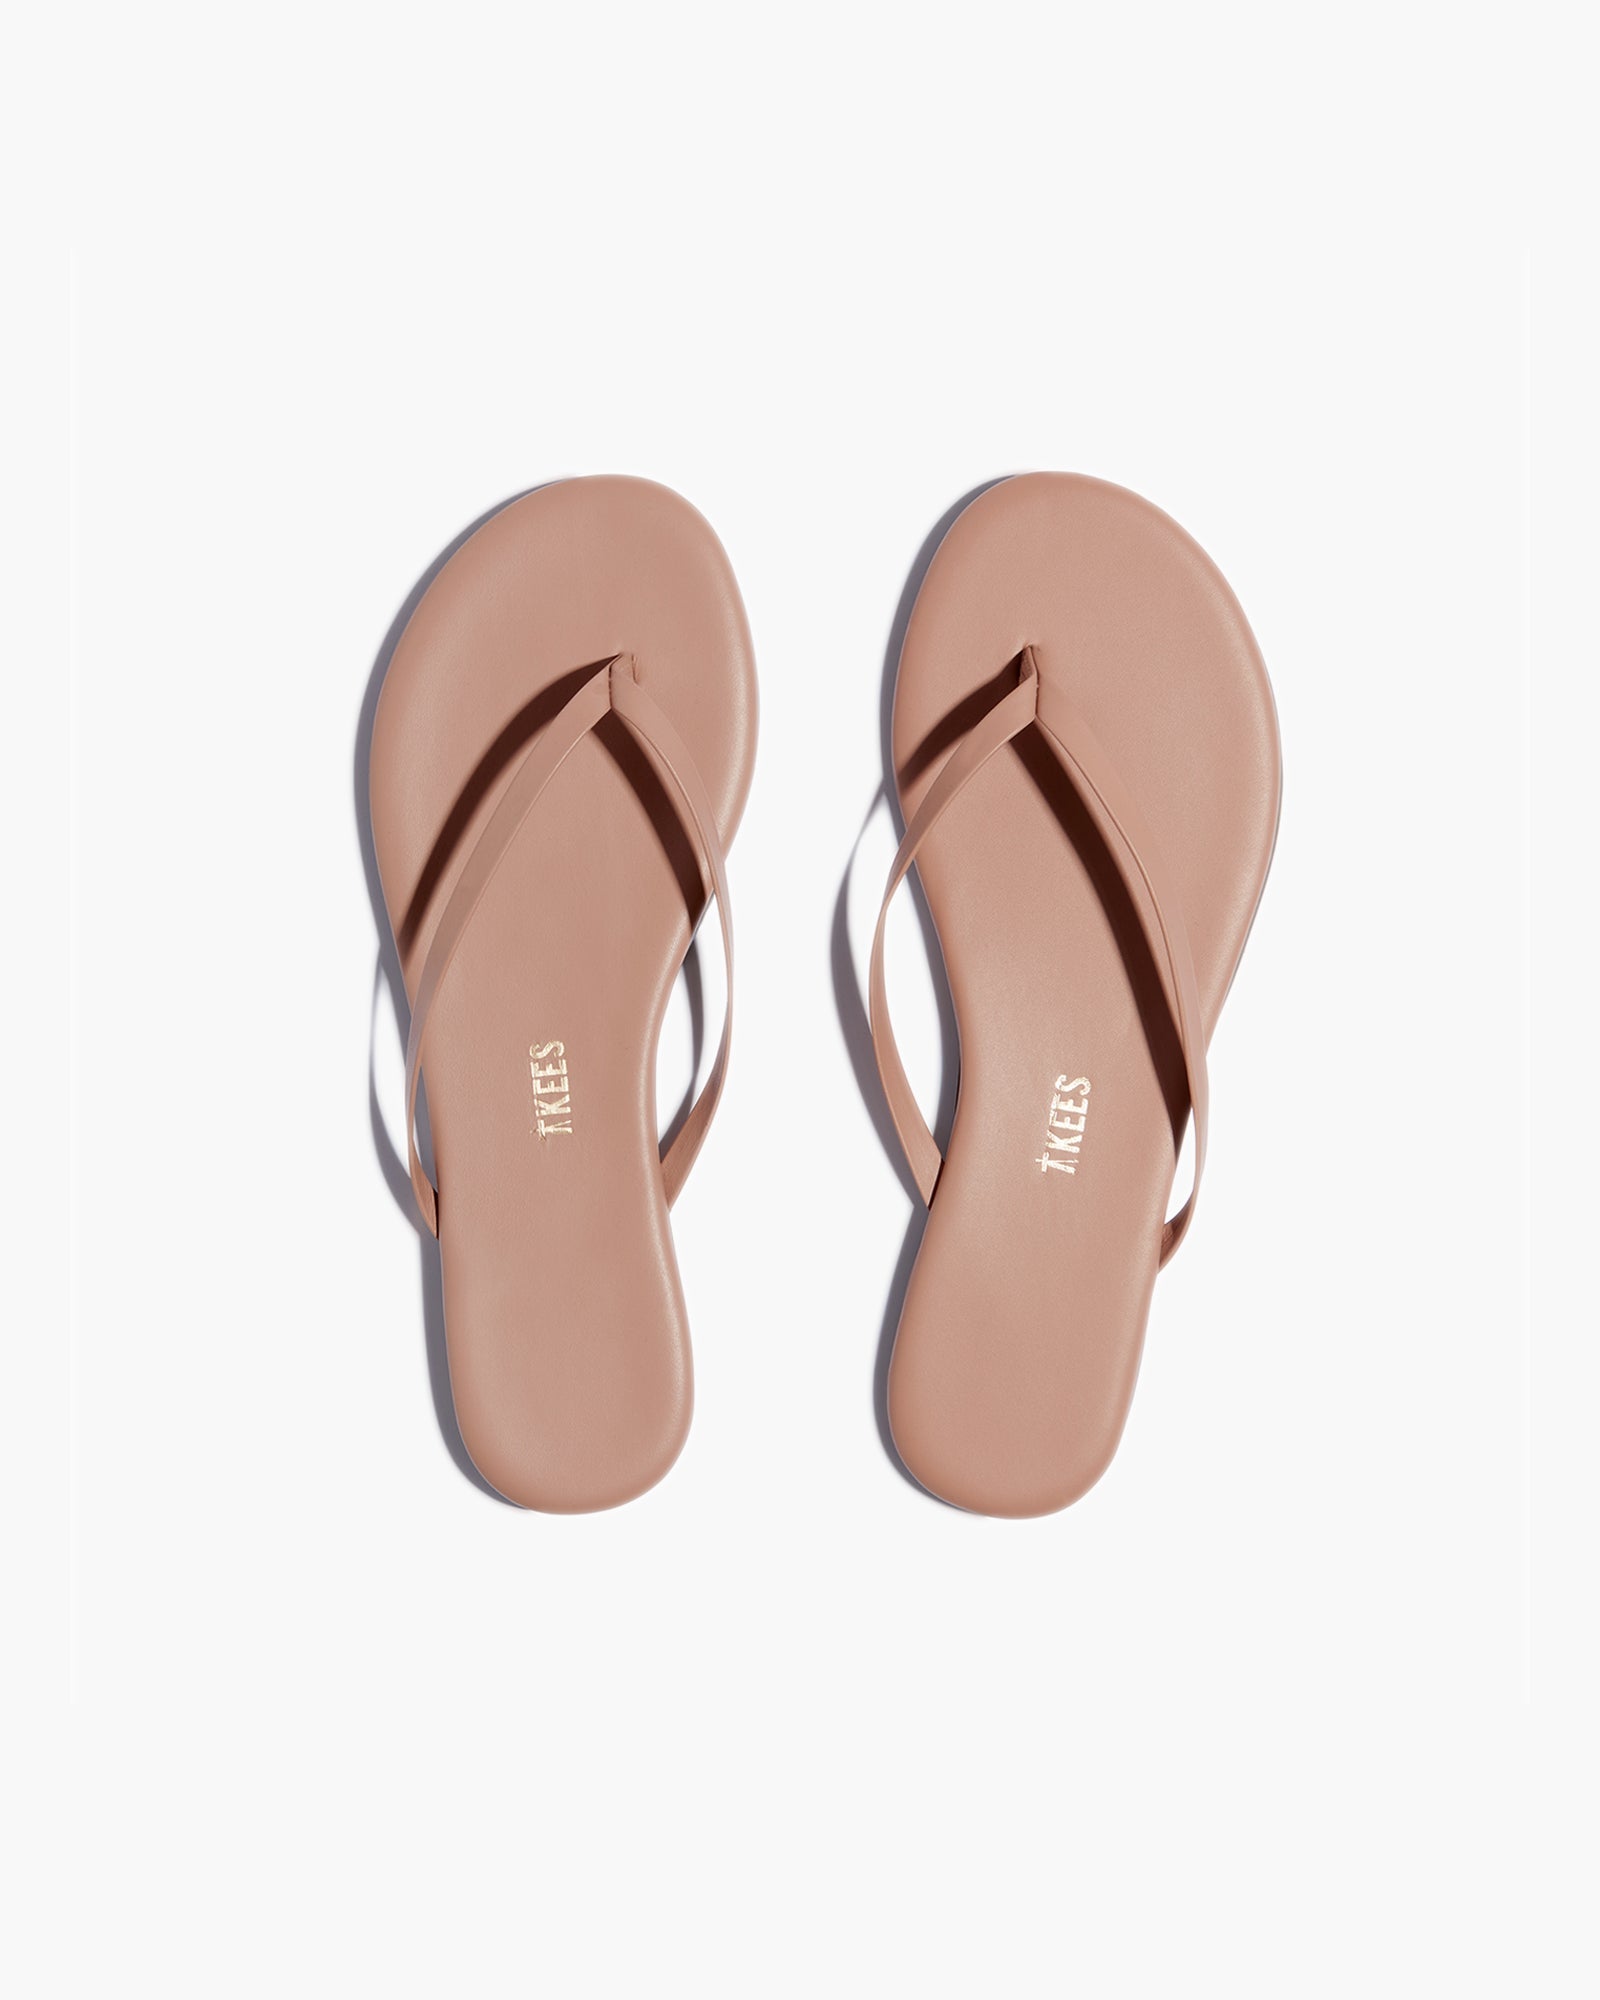 Pink Women's's's's's's's's's's's's's's's's's's's's's's TKEES Lily Nudes Flip Flops | AGVDUY920